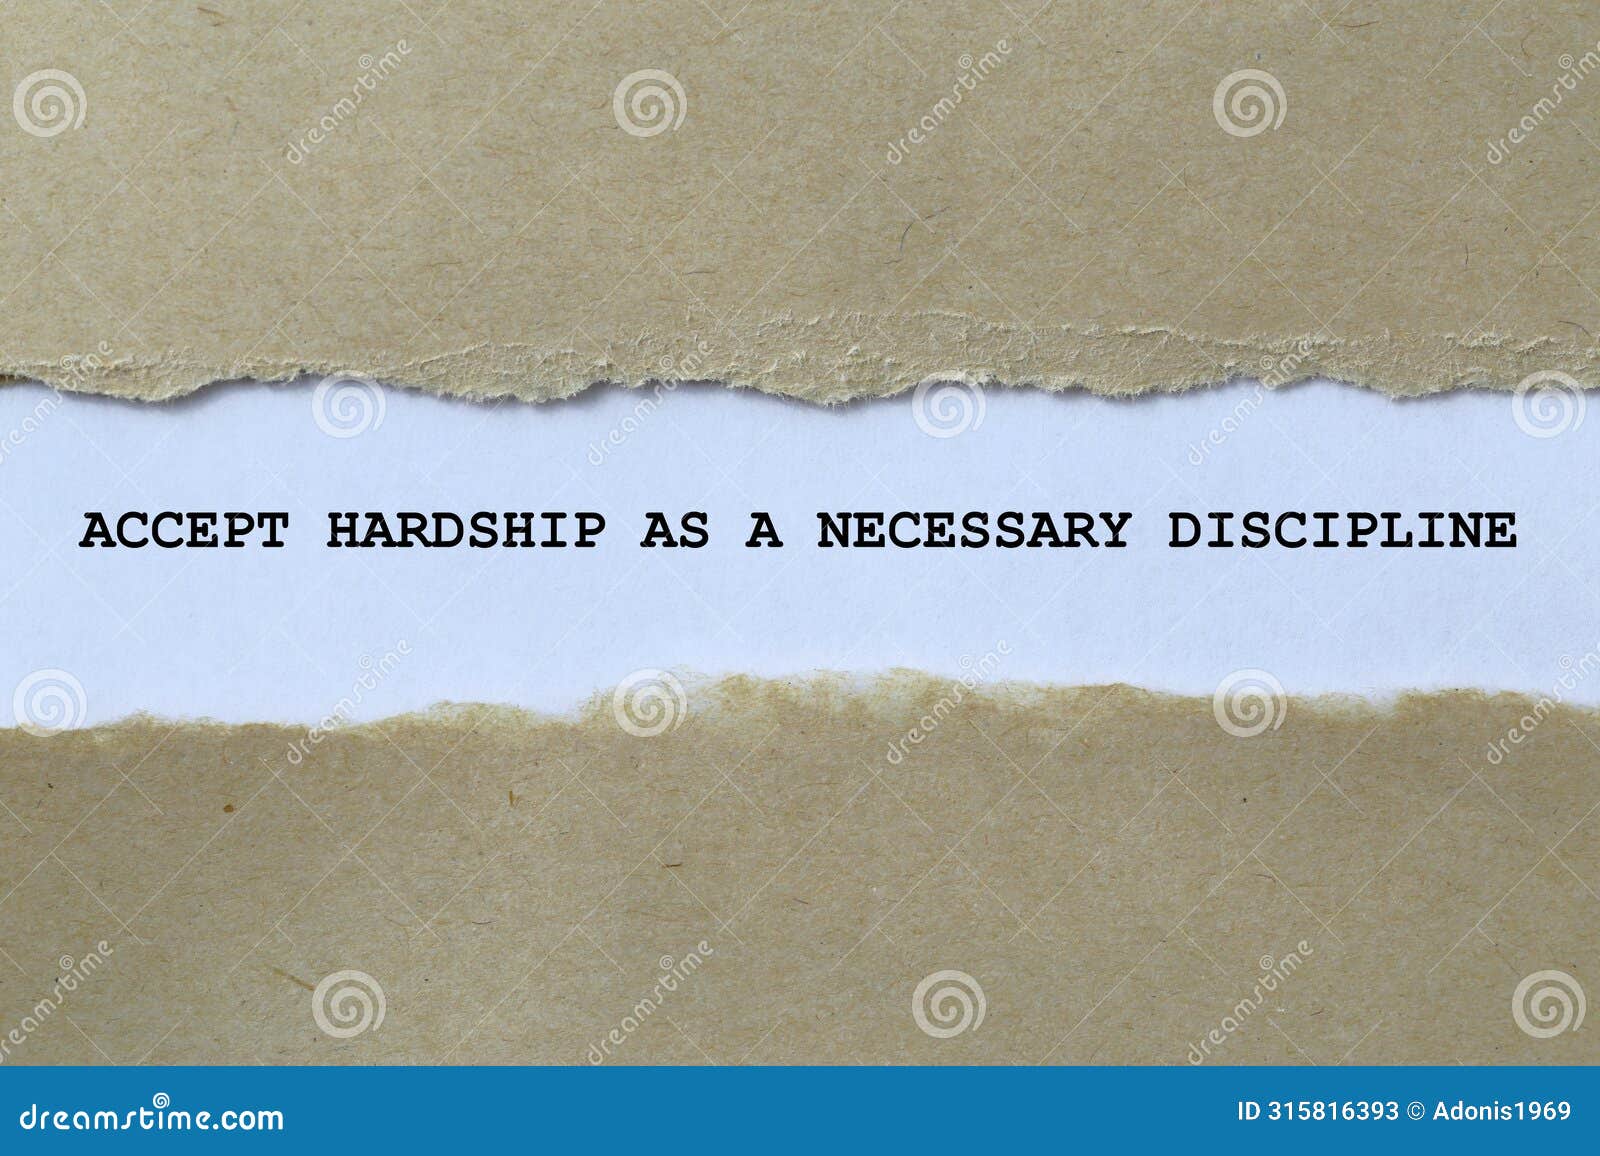 accept hardship as a necessary discipline on white paper